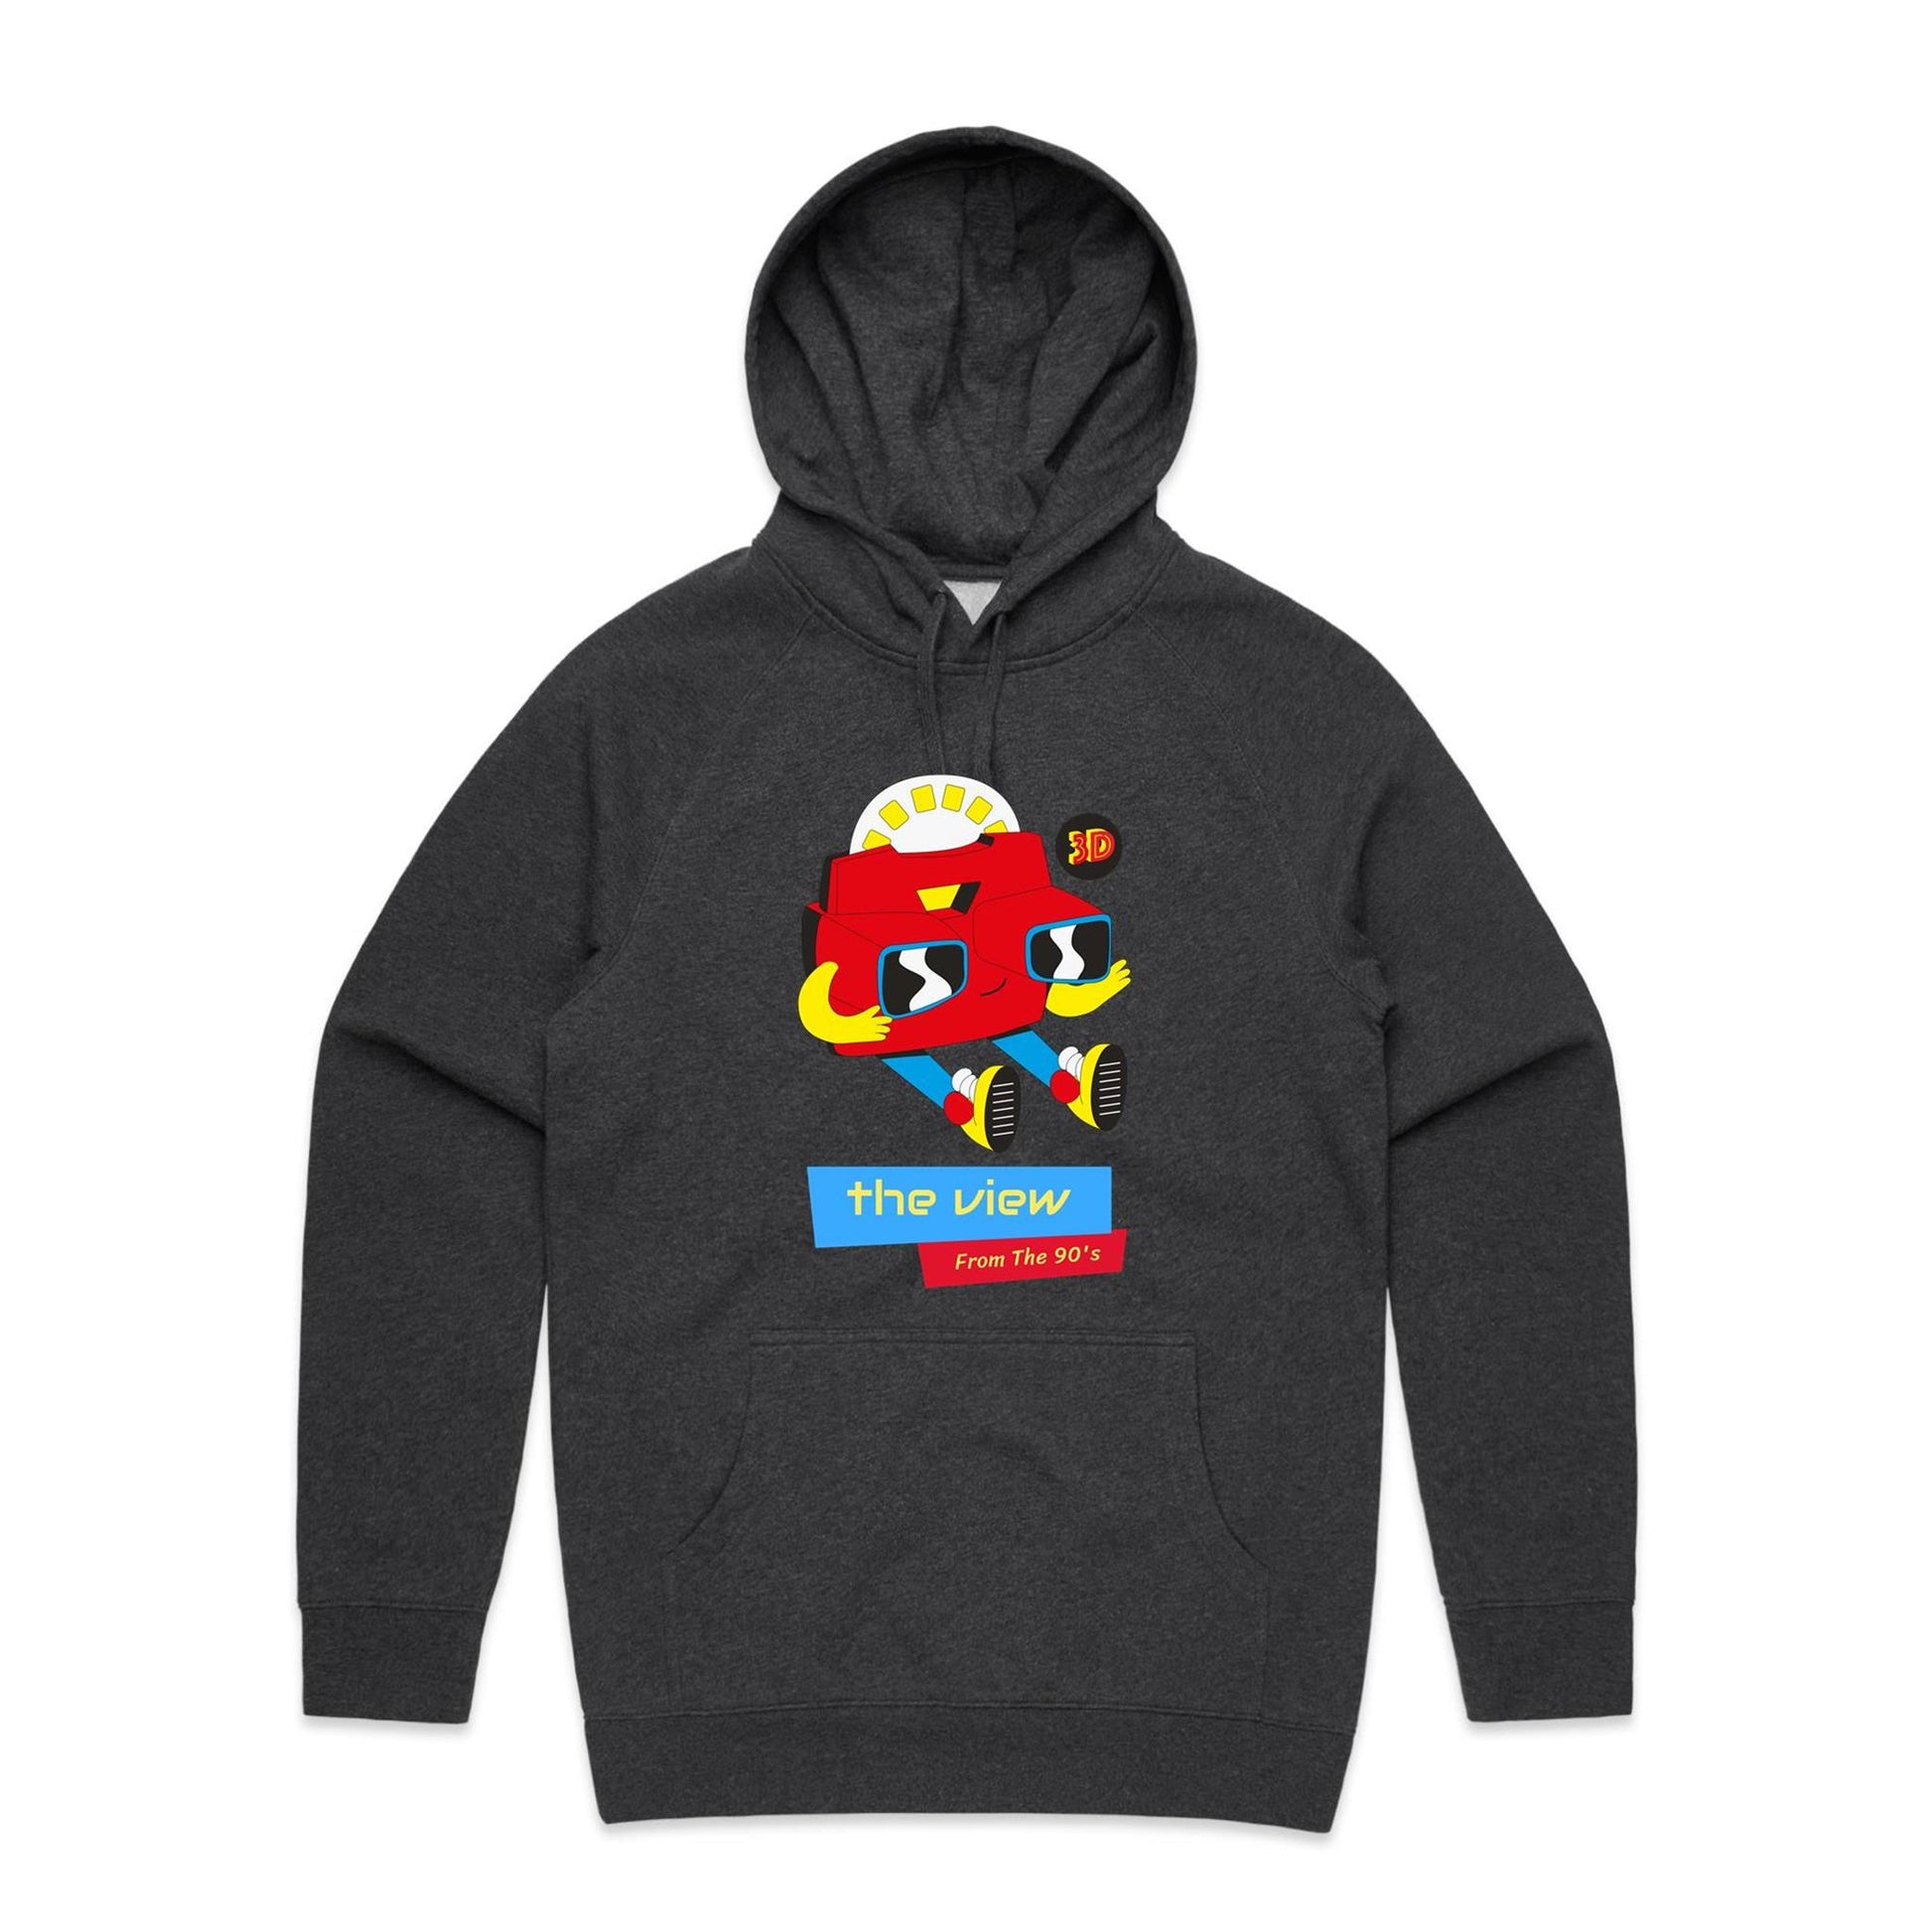 The View From The 90's - Supply Hood Asphalt Marle Mens Supply Hoodie Retro